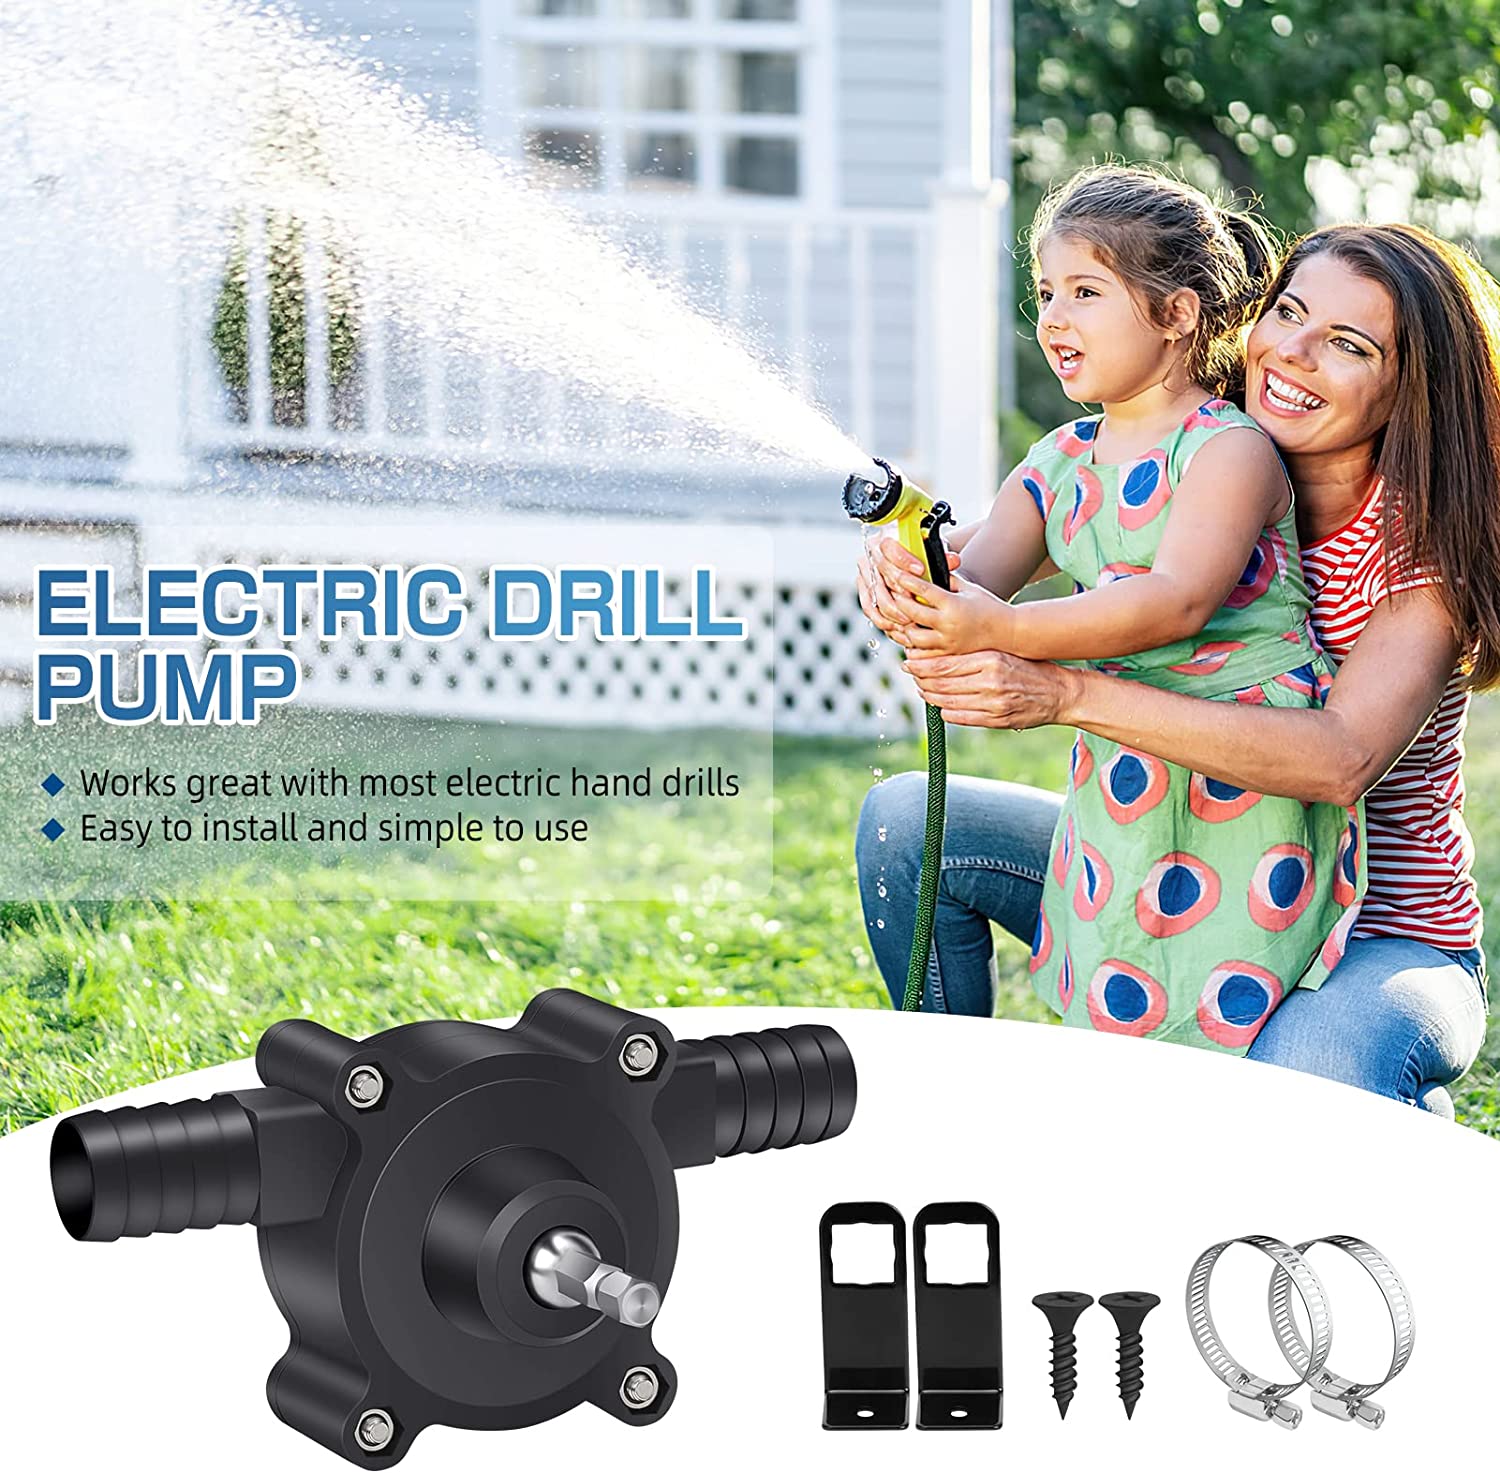 🧰Last Day Special Sale 50% OFF - Self-Priming Water Pumps